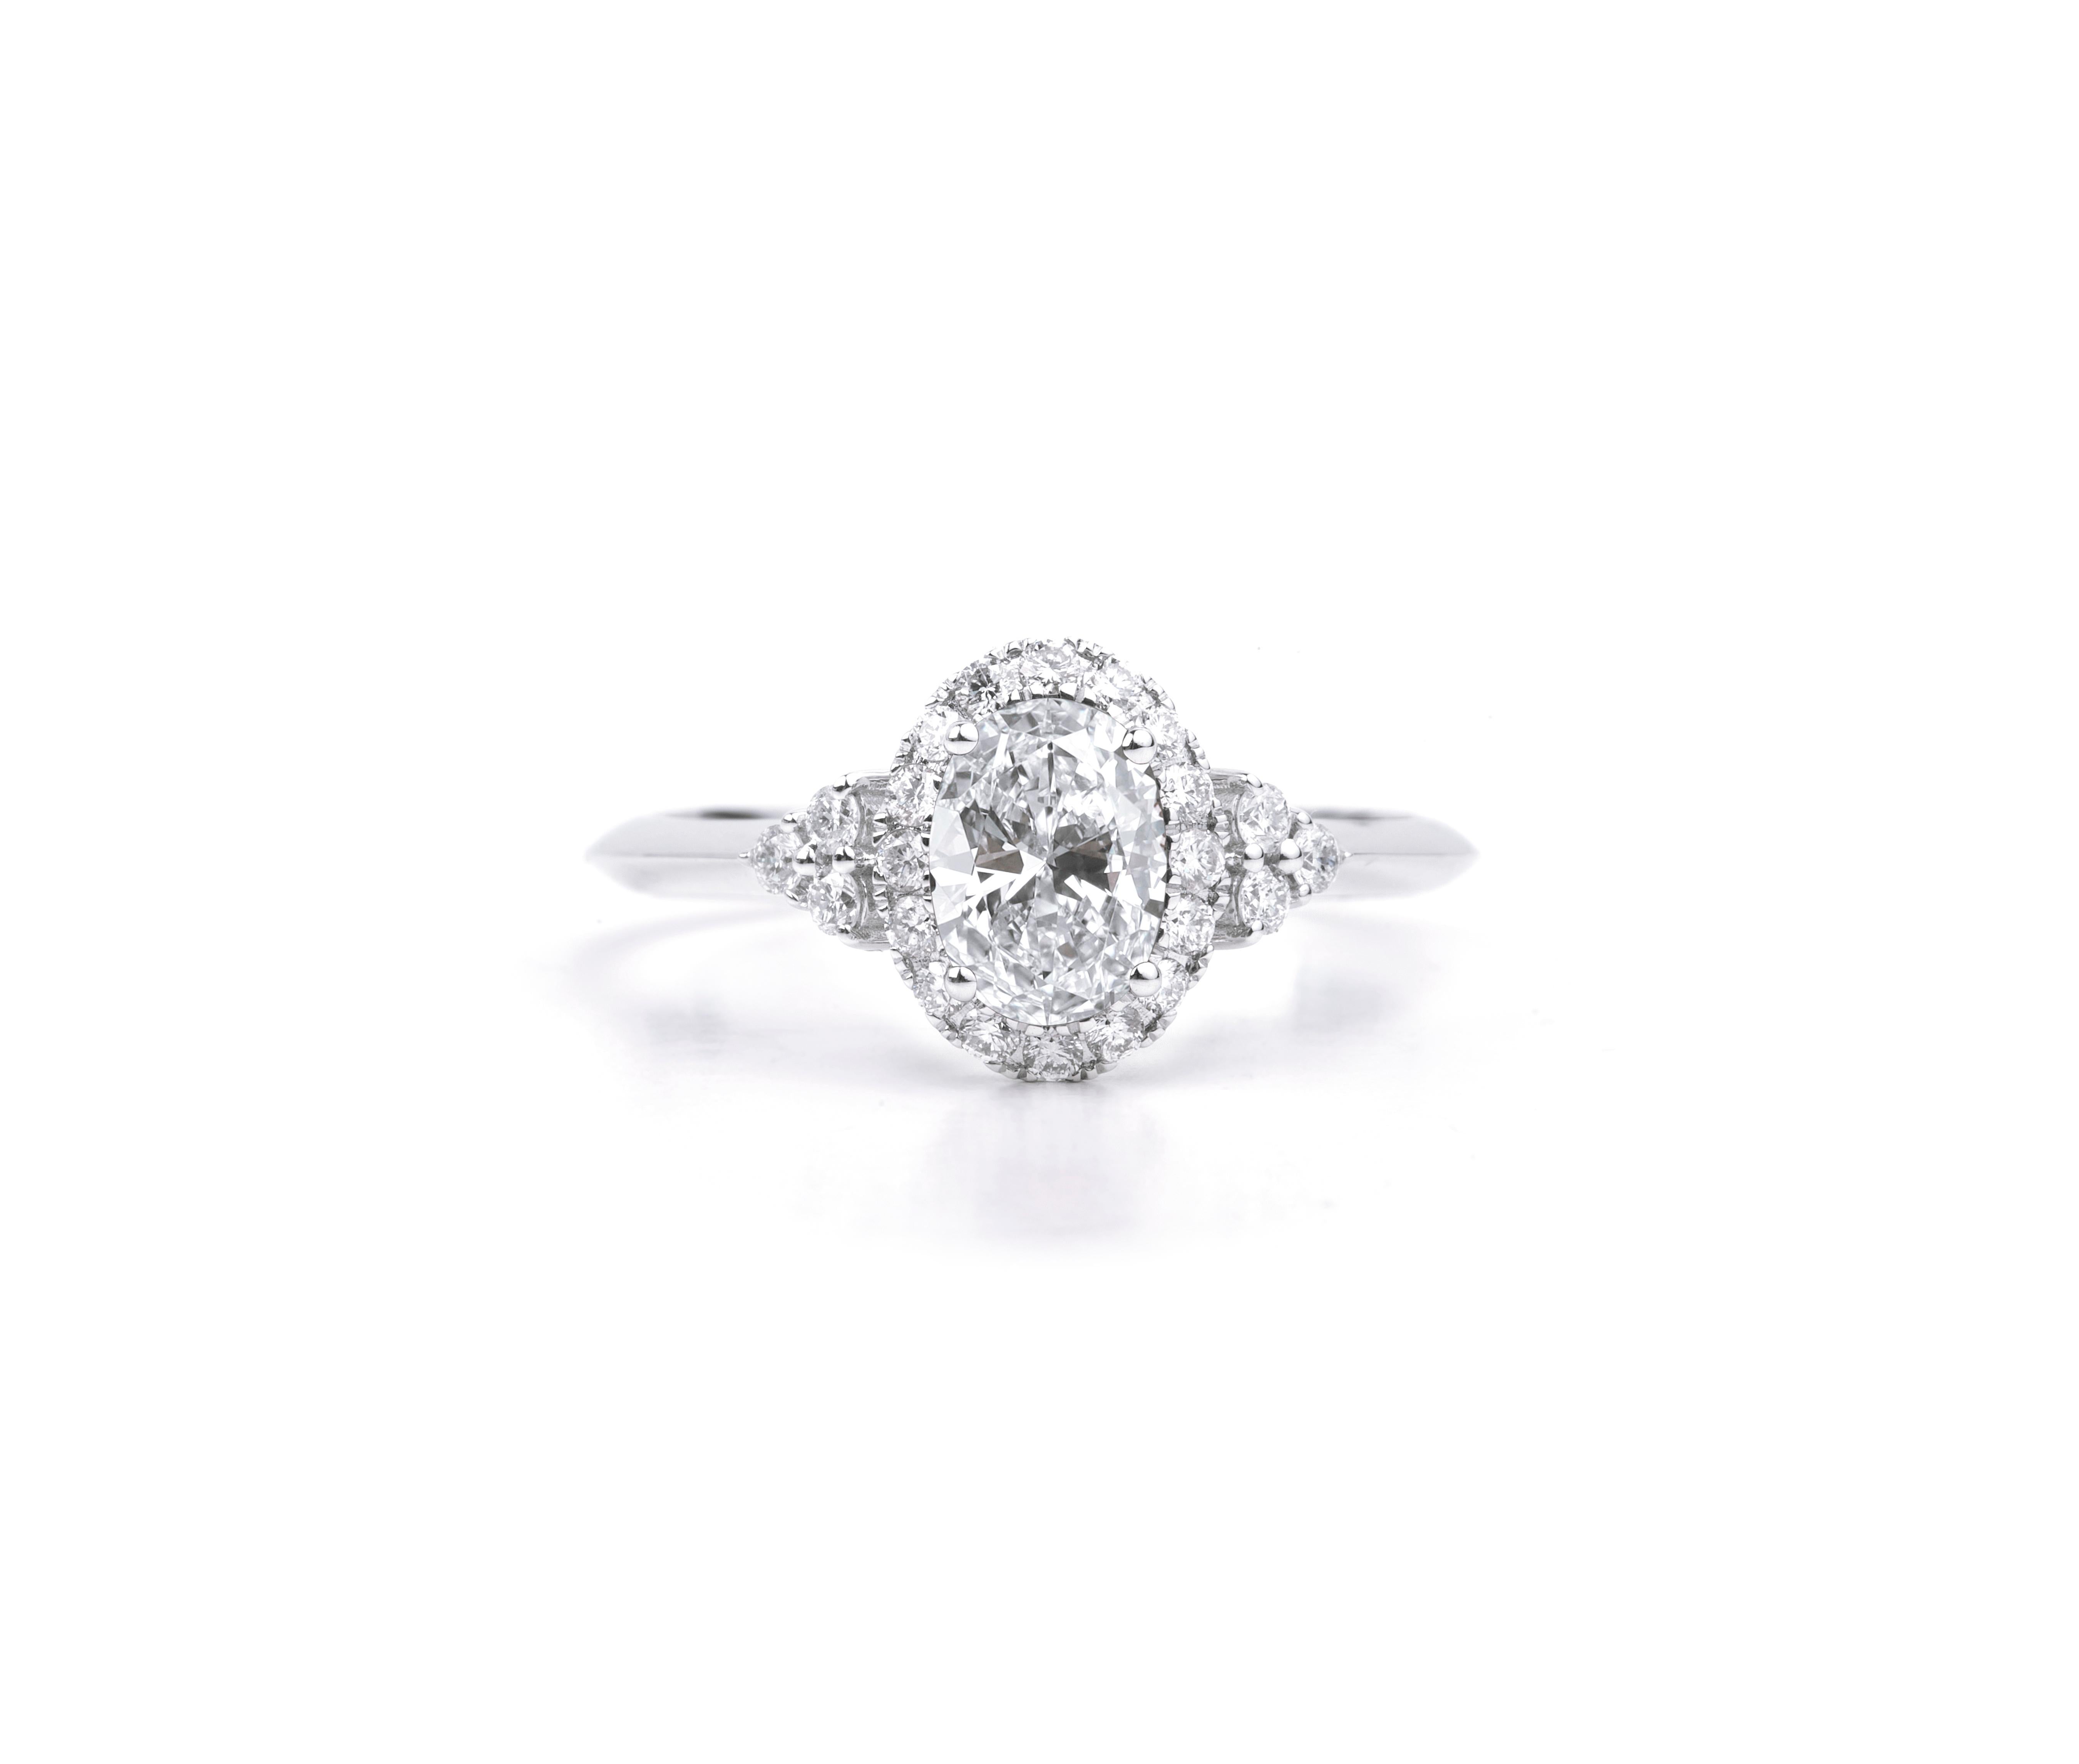 GIA Report Certified 1 carat E VS Oval Cut Diamond Engagement Cocktail Ring 

Available in 18k white gold.

Same design can be made also with other custom gemstones per request.

Product details:

- Solid gold

- Side diamond - approx. 0.24 carat E